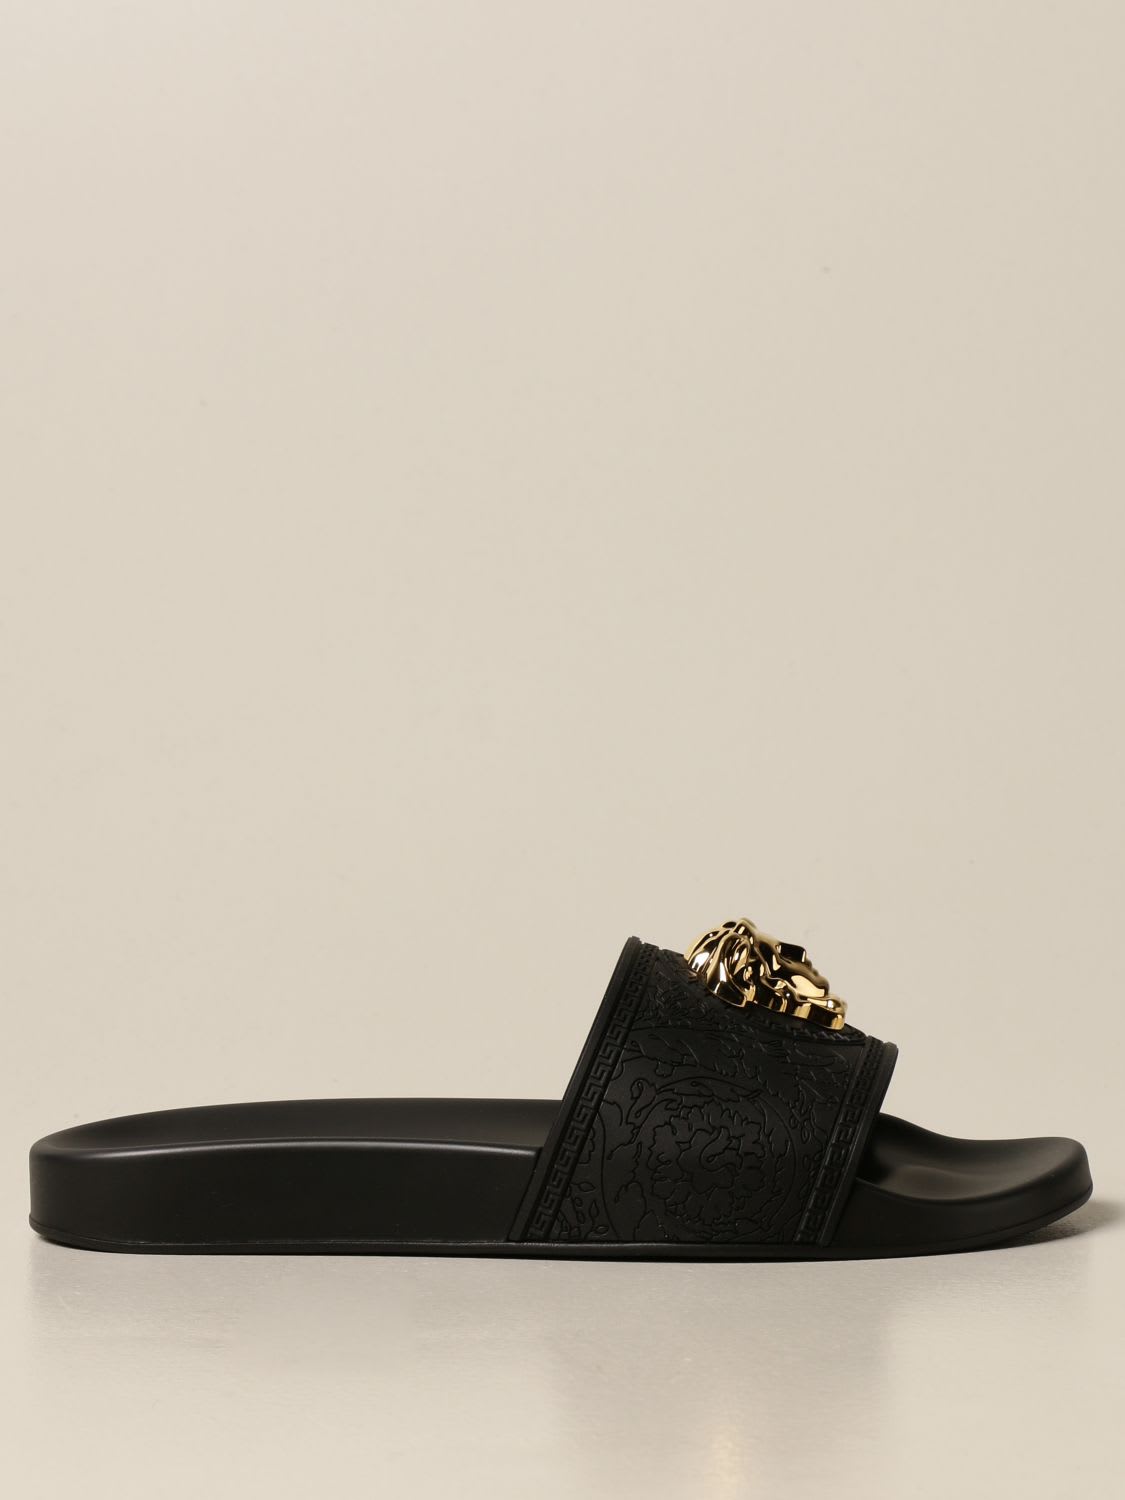 Buy Versace Flat Sandals Palazzo Versace Rubber Sandal With Medusa Head online, shop Versace shoes with free shipping